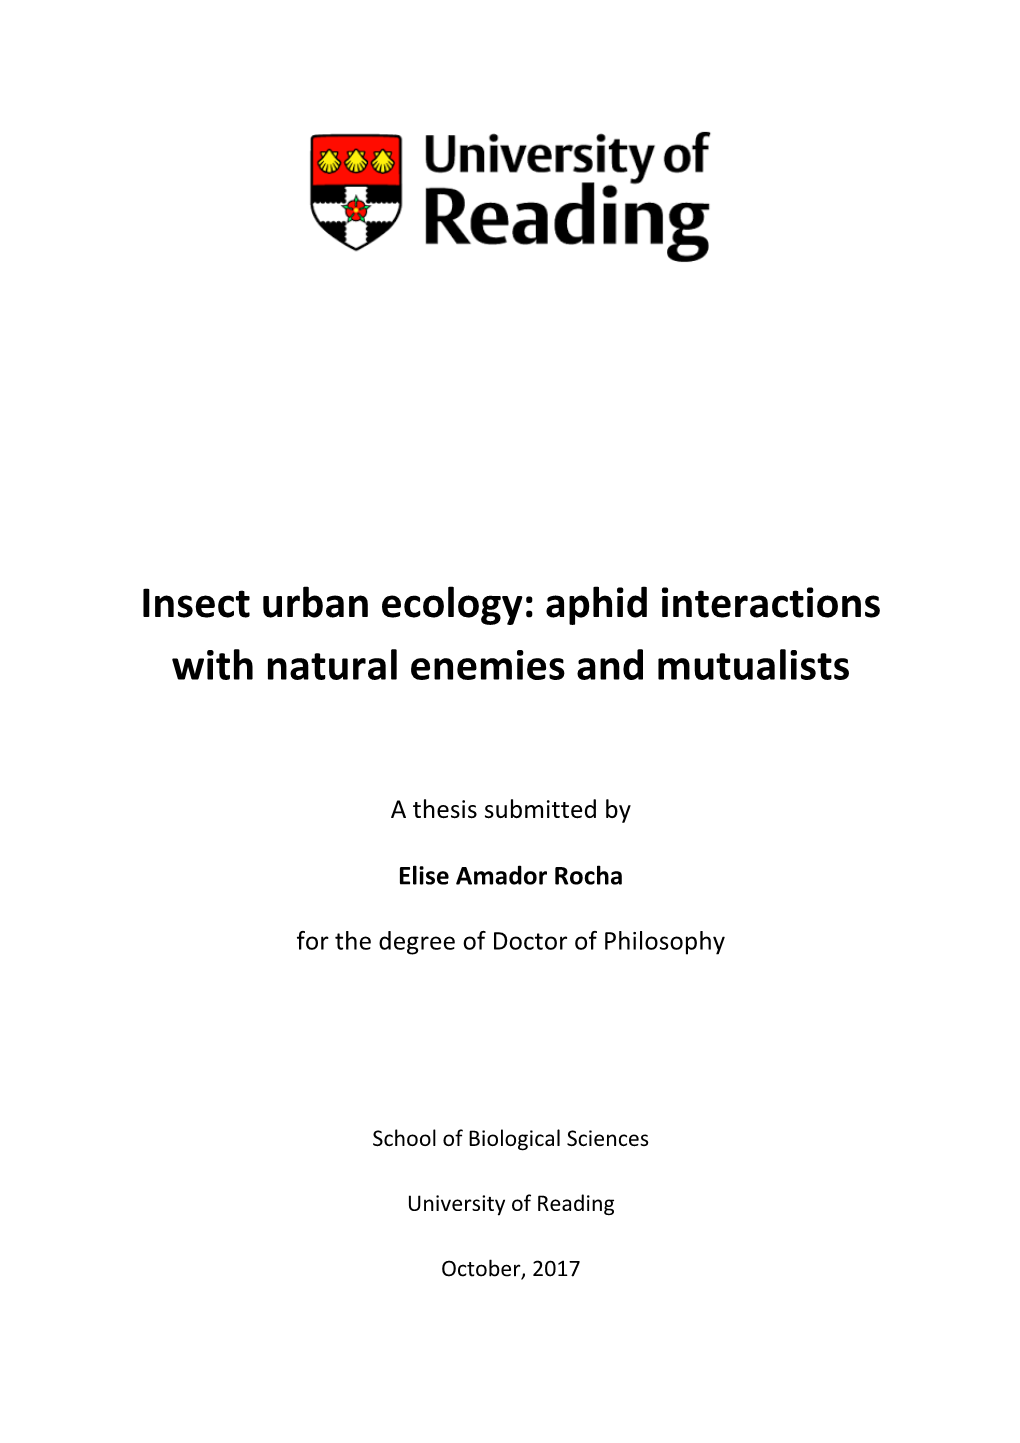 Aphid Interactions with Natural Enemies and Mutualists